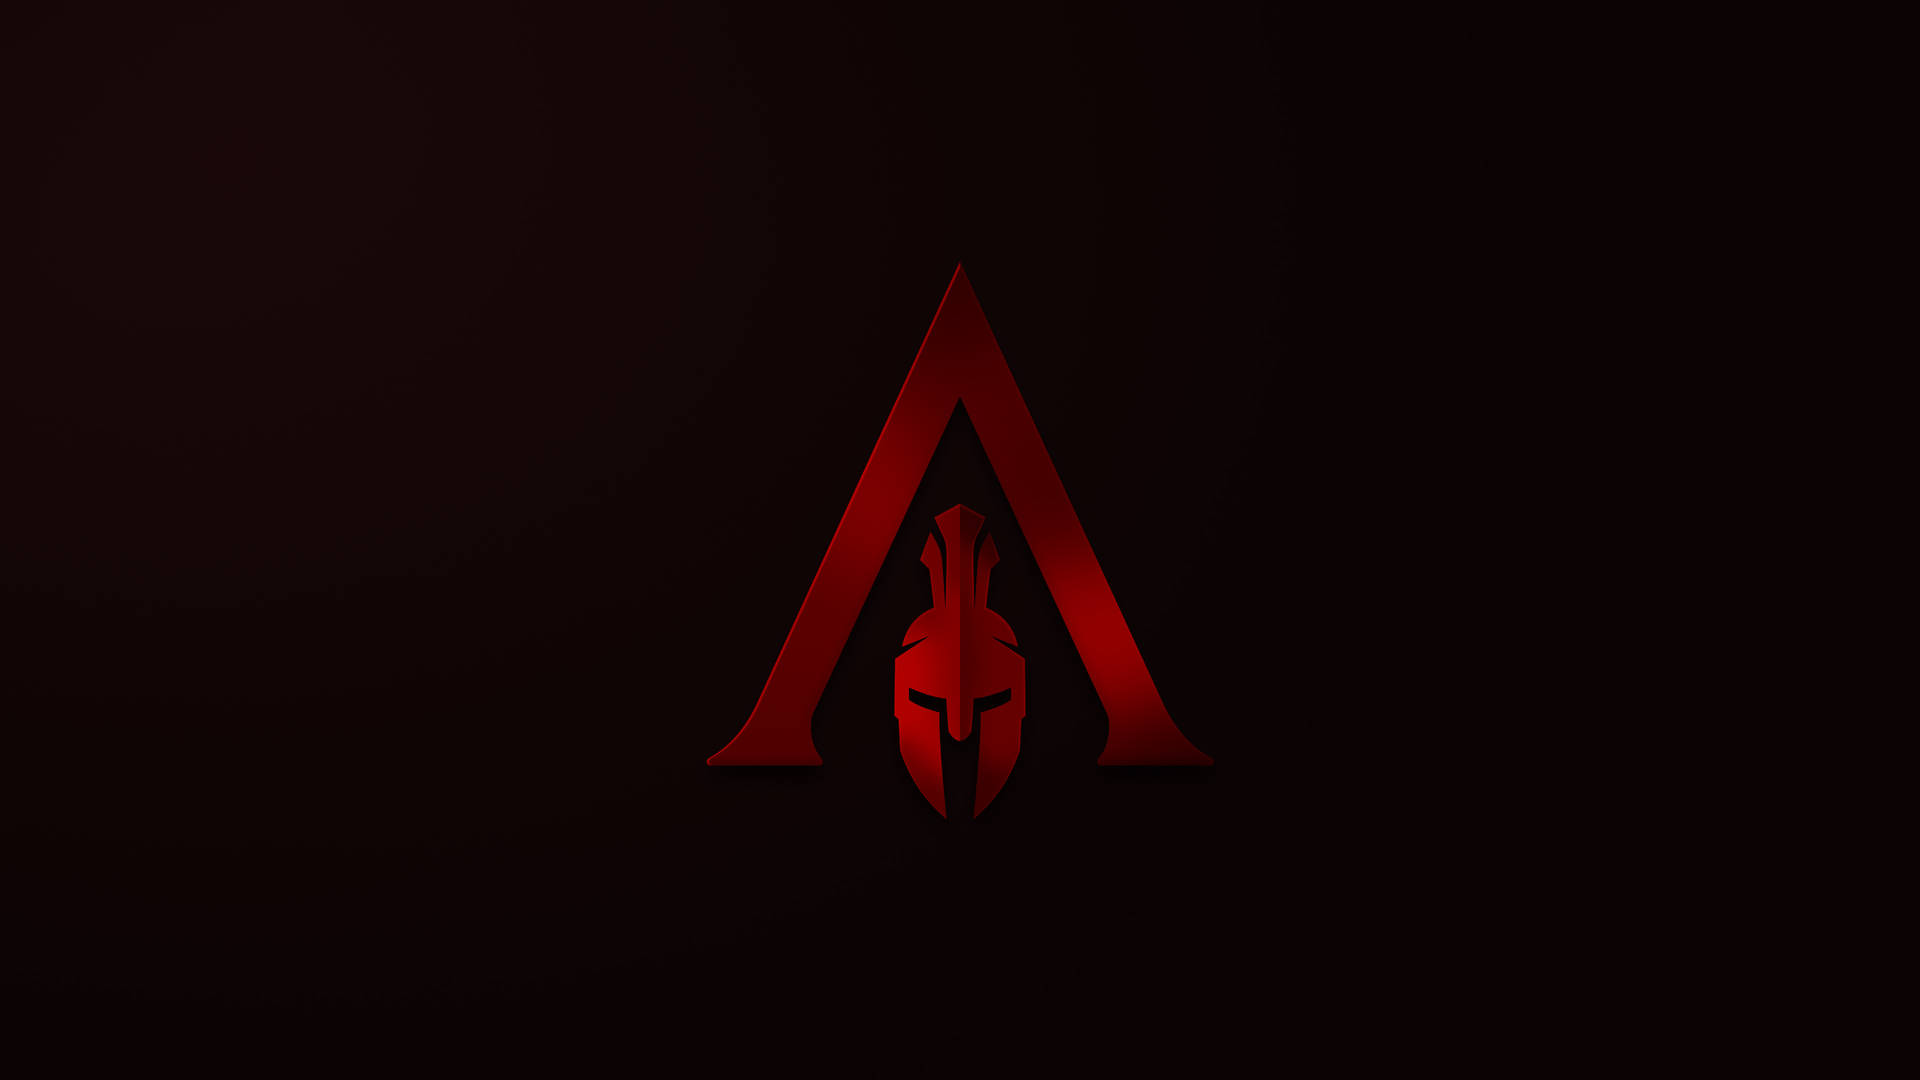 Assassin's Creed Odyssey Aesthetic Game Logo